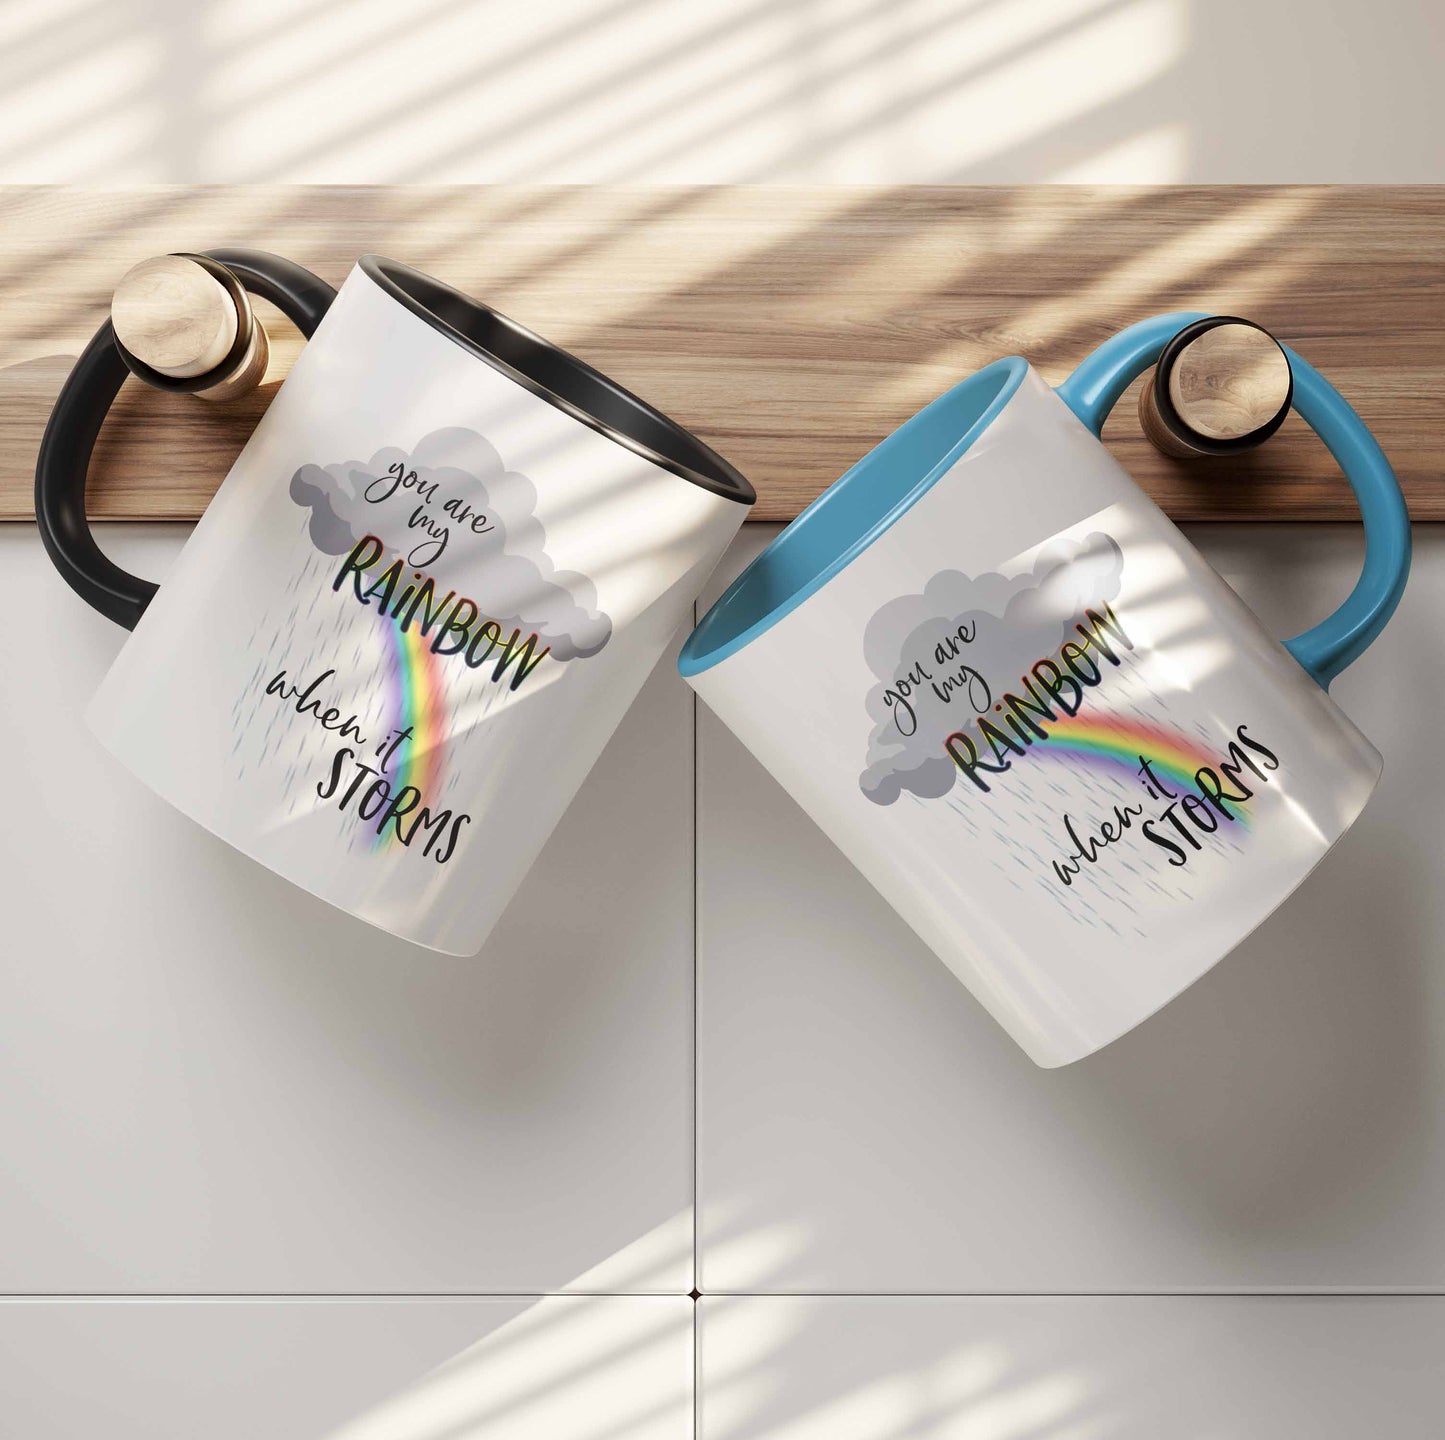 You Are My Rainbow Mug in two sizes